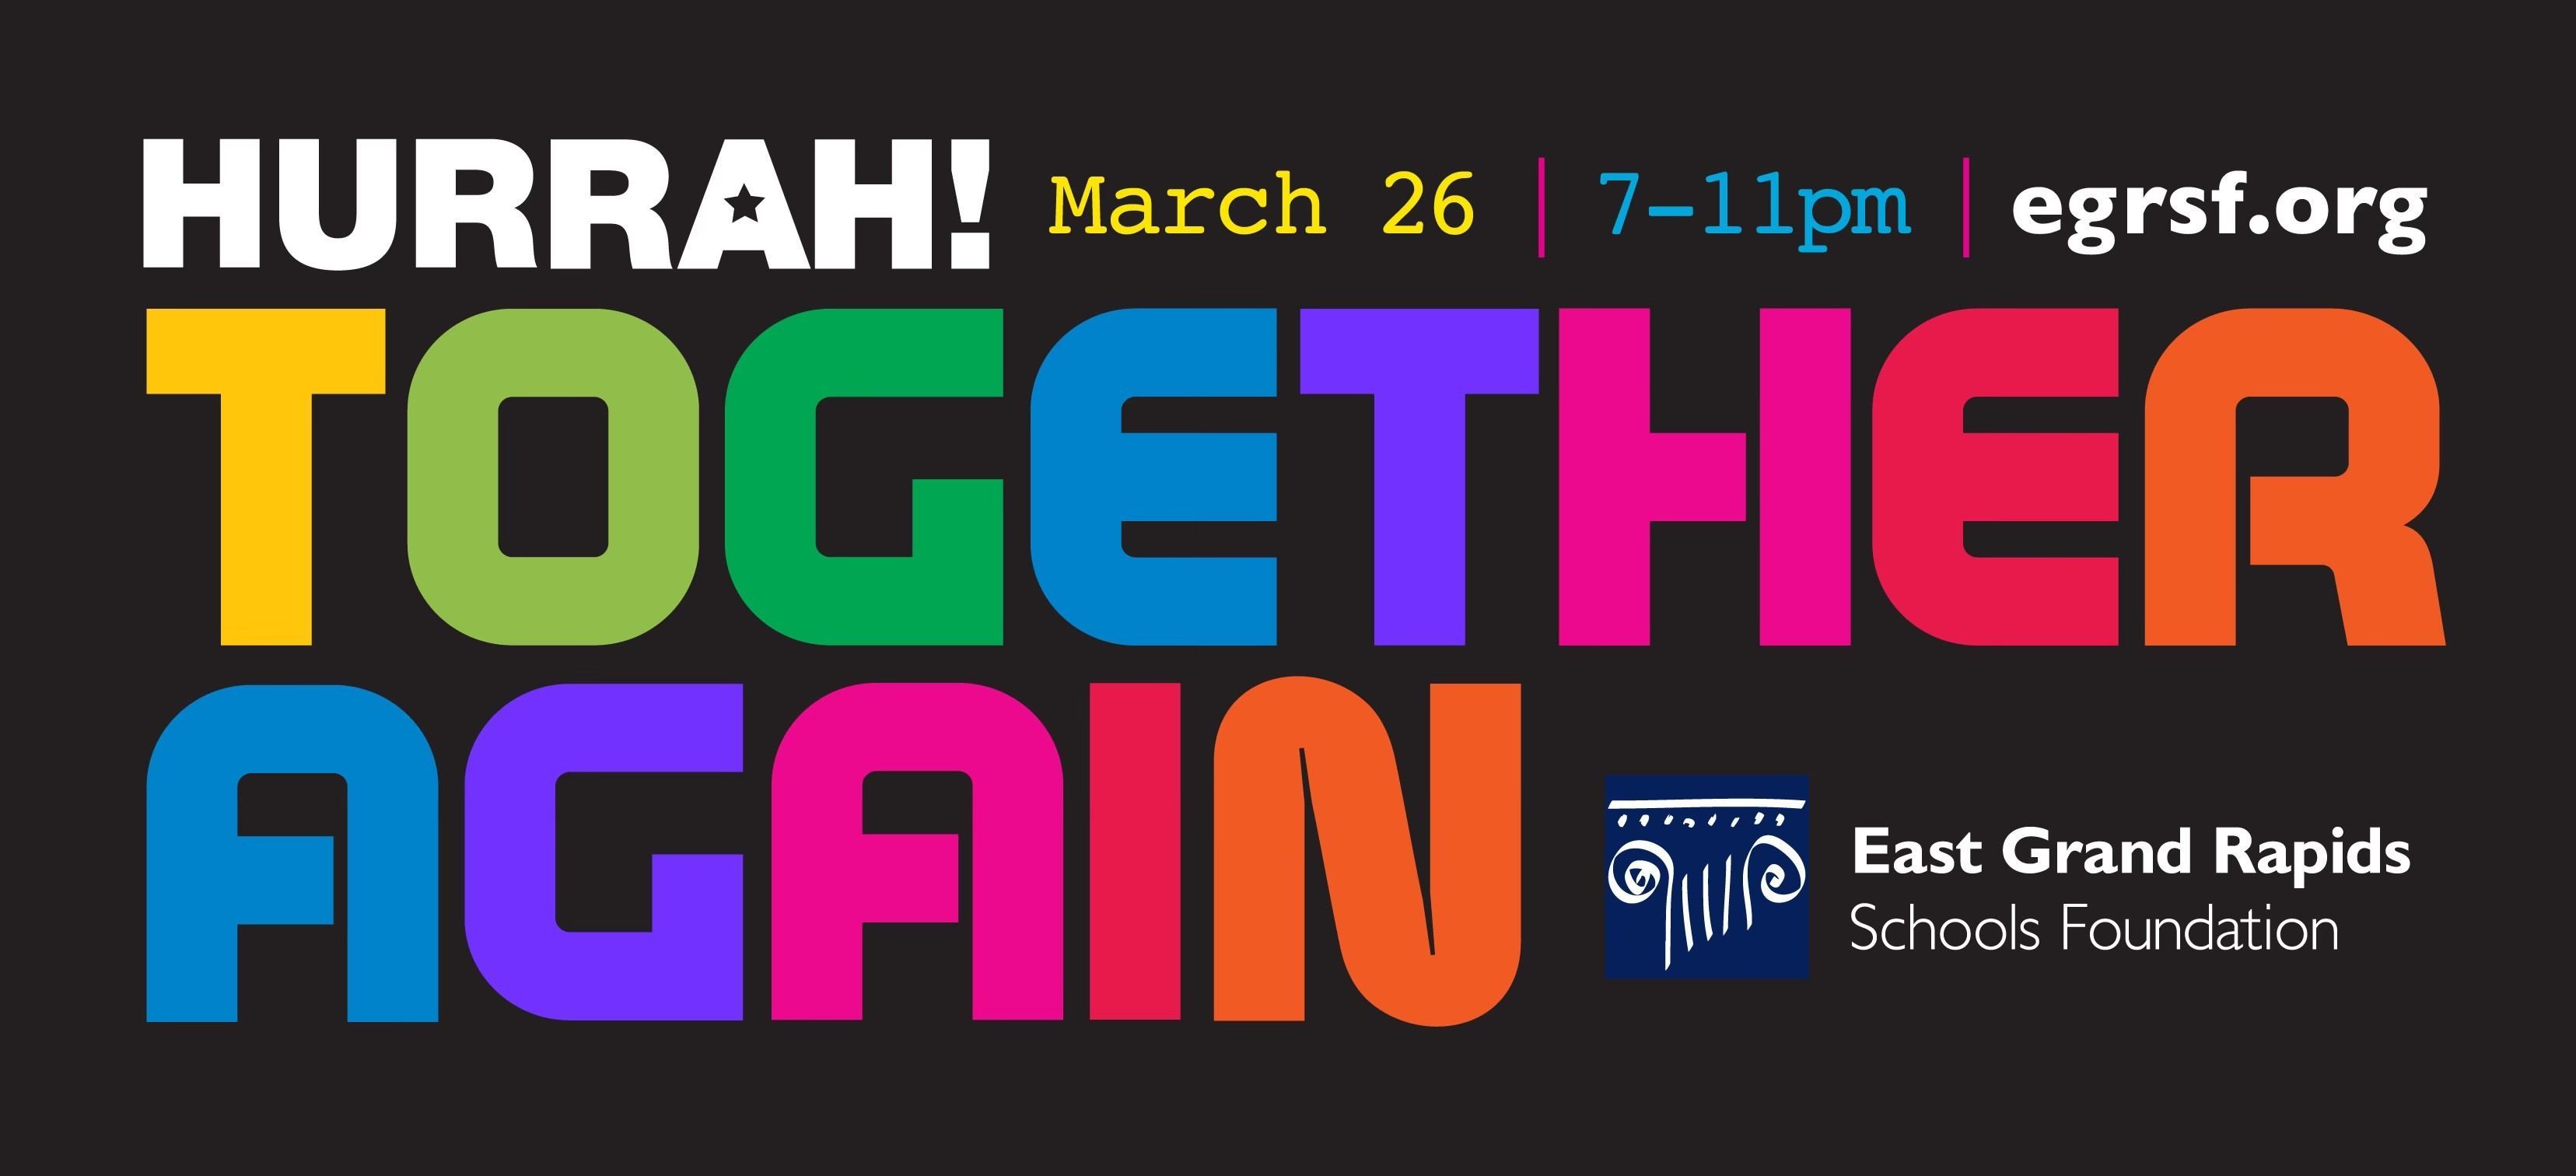 Save the Date! Hurrah: Together Again! Saturday March 26